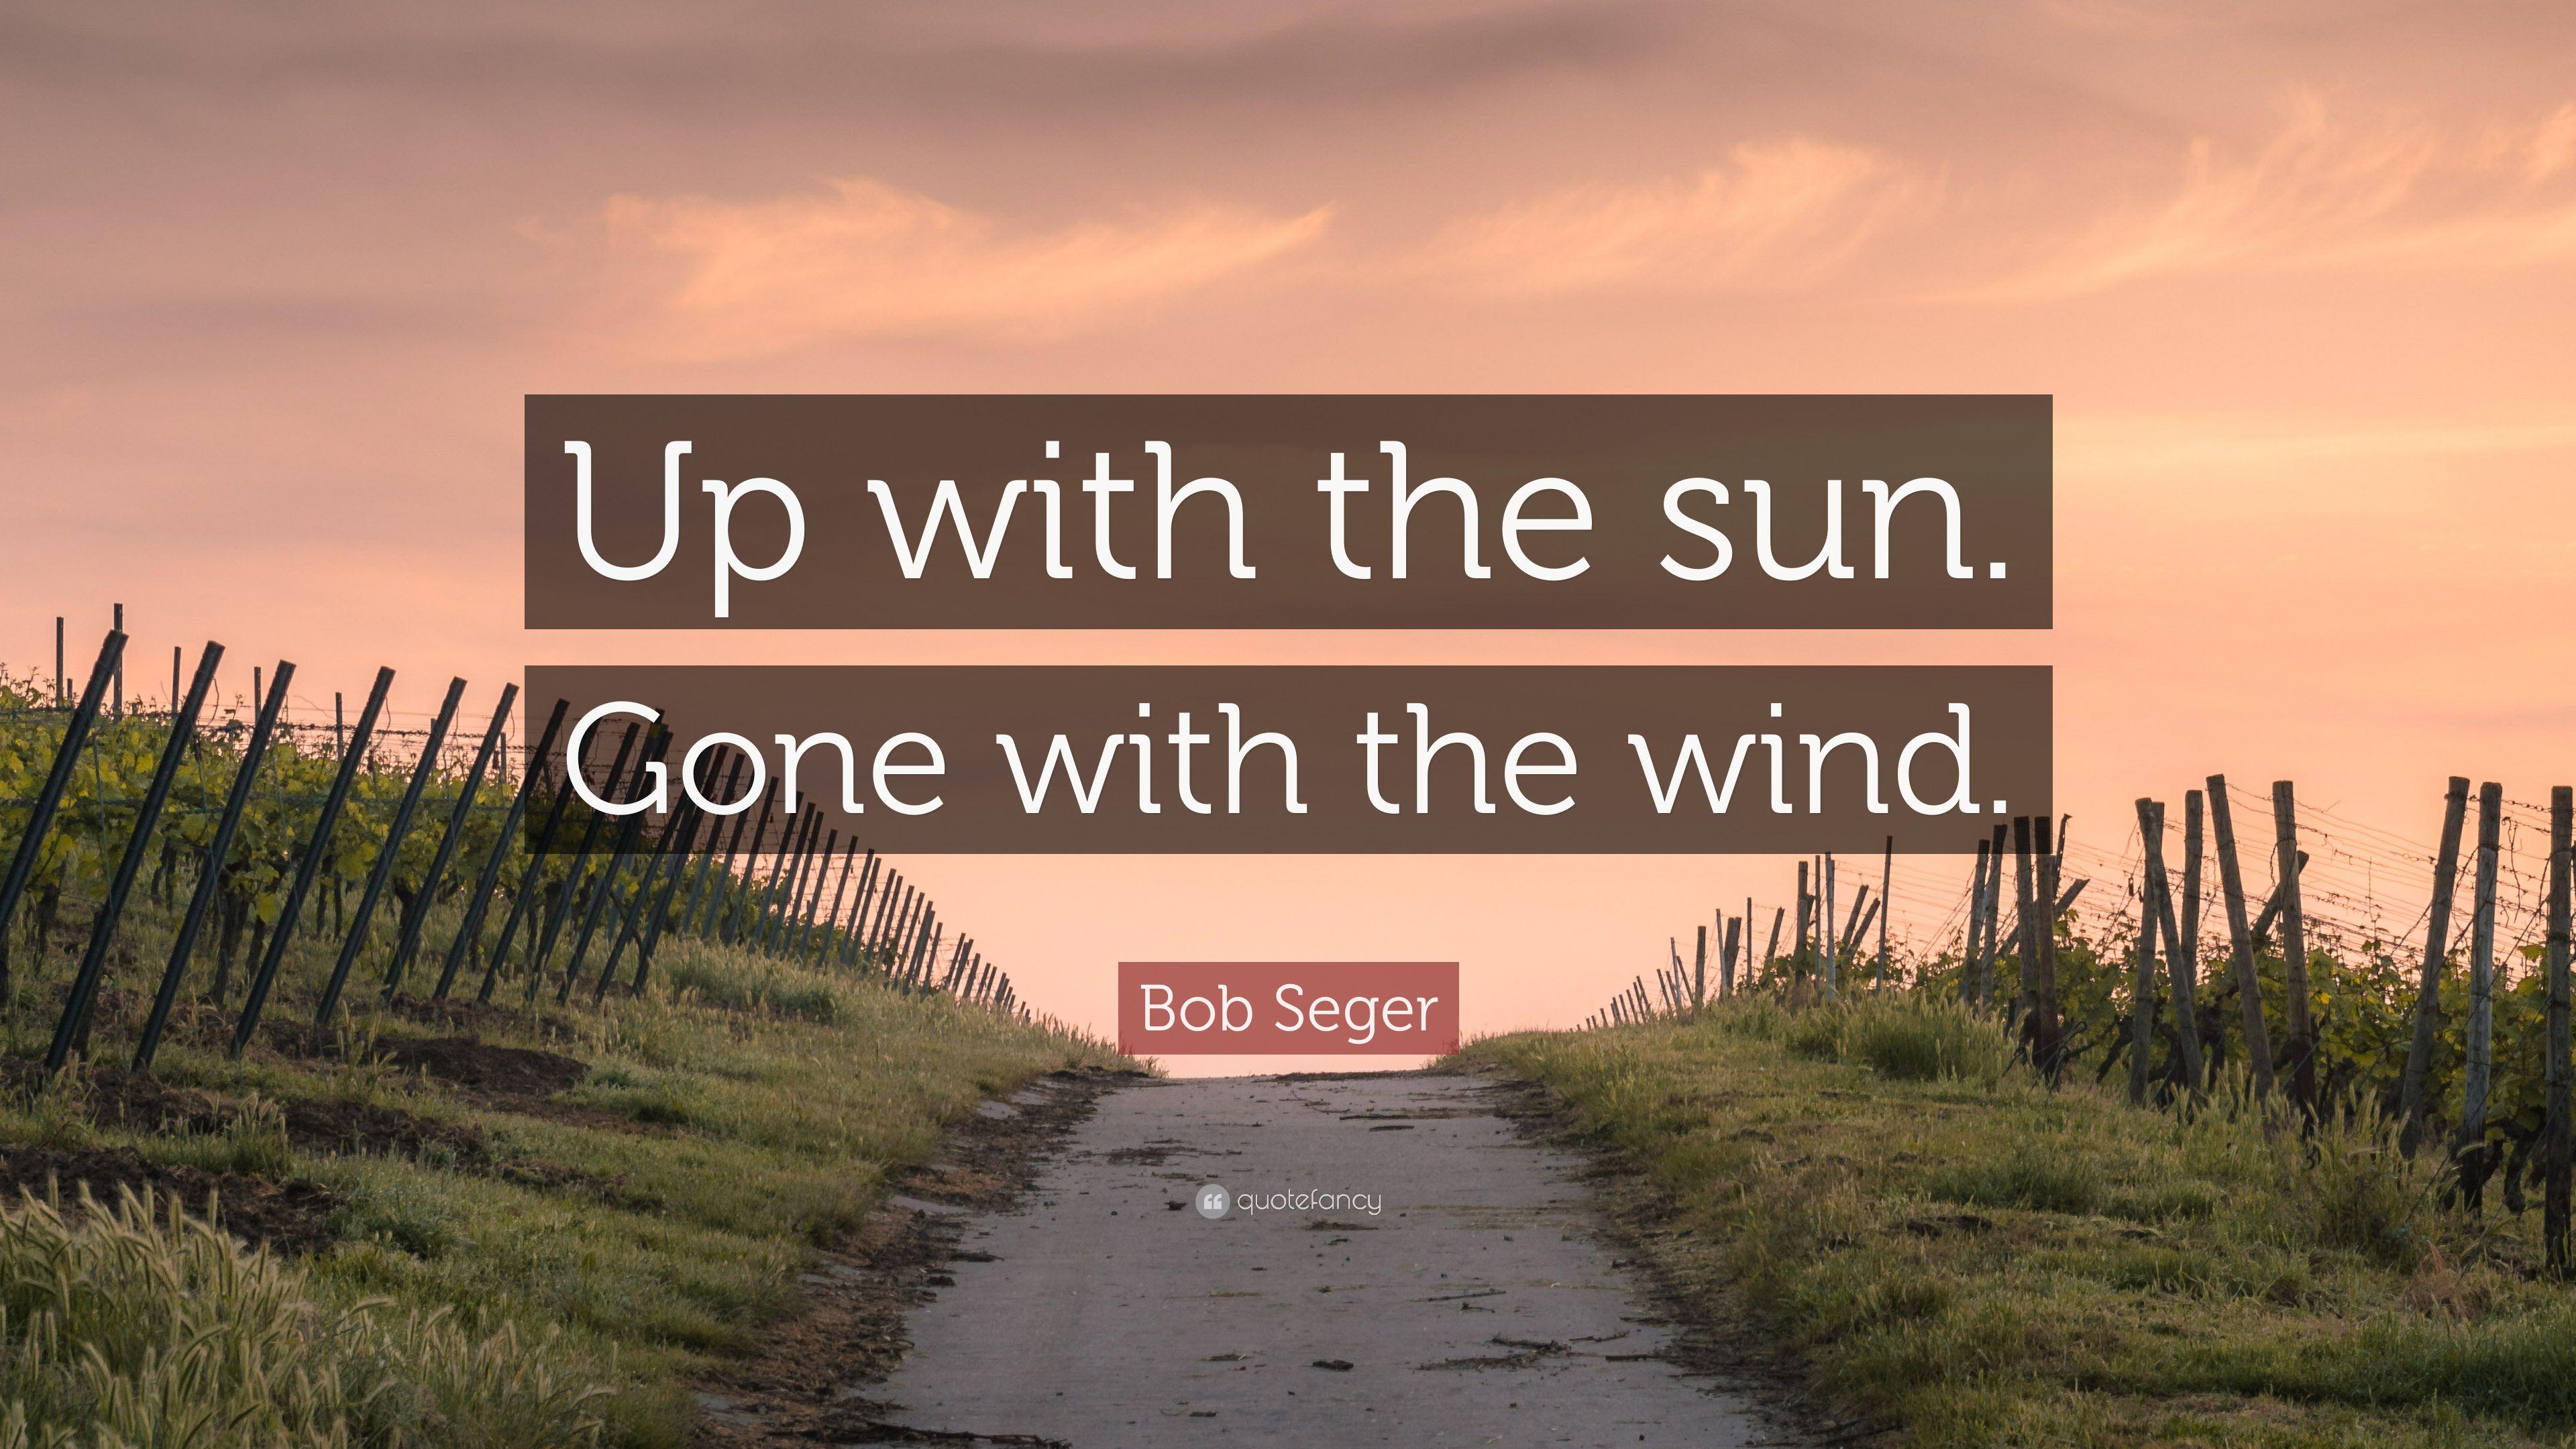 Bob Seger Quote: “Up with the sun. Gone with the wind.” 9